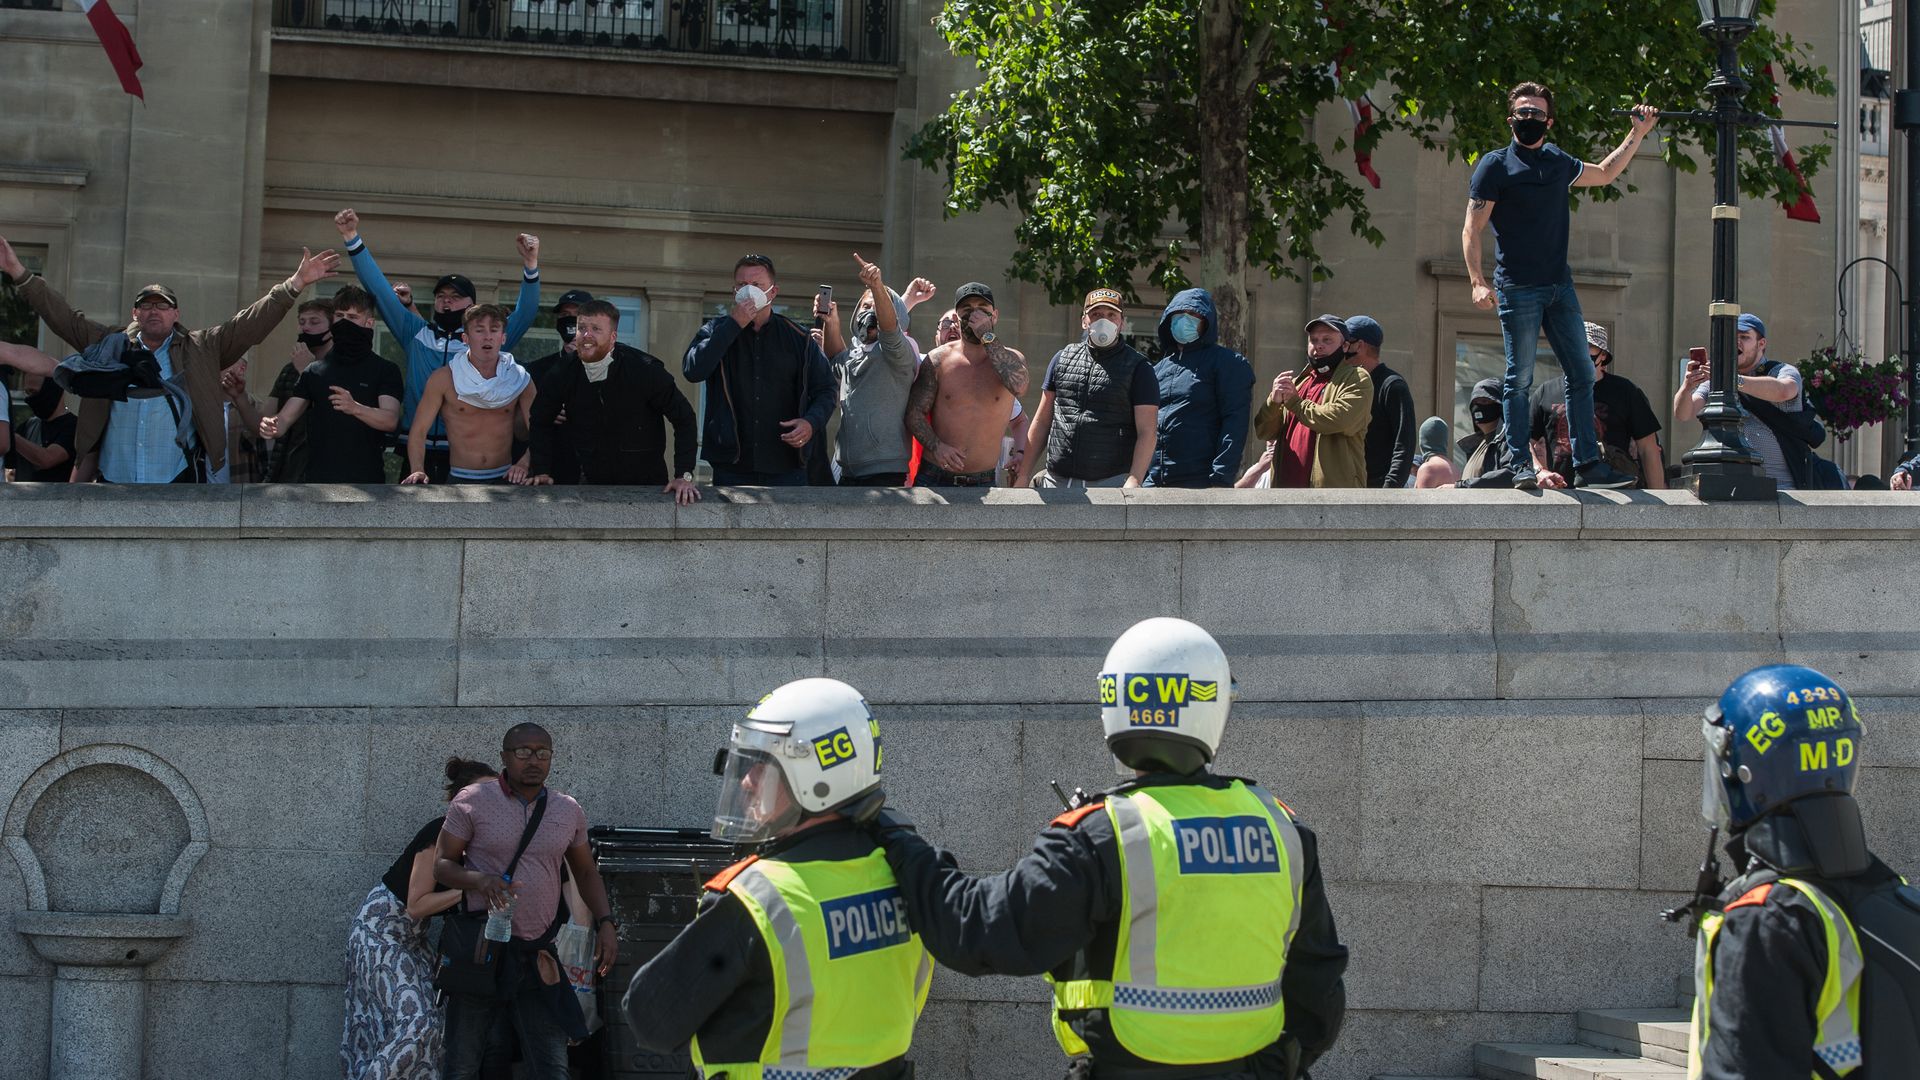  Far-right protesters demonstrate by the London Black Revs in Trafalgar square on June 13, 2020 in London, England. 